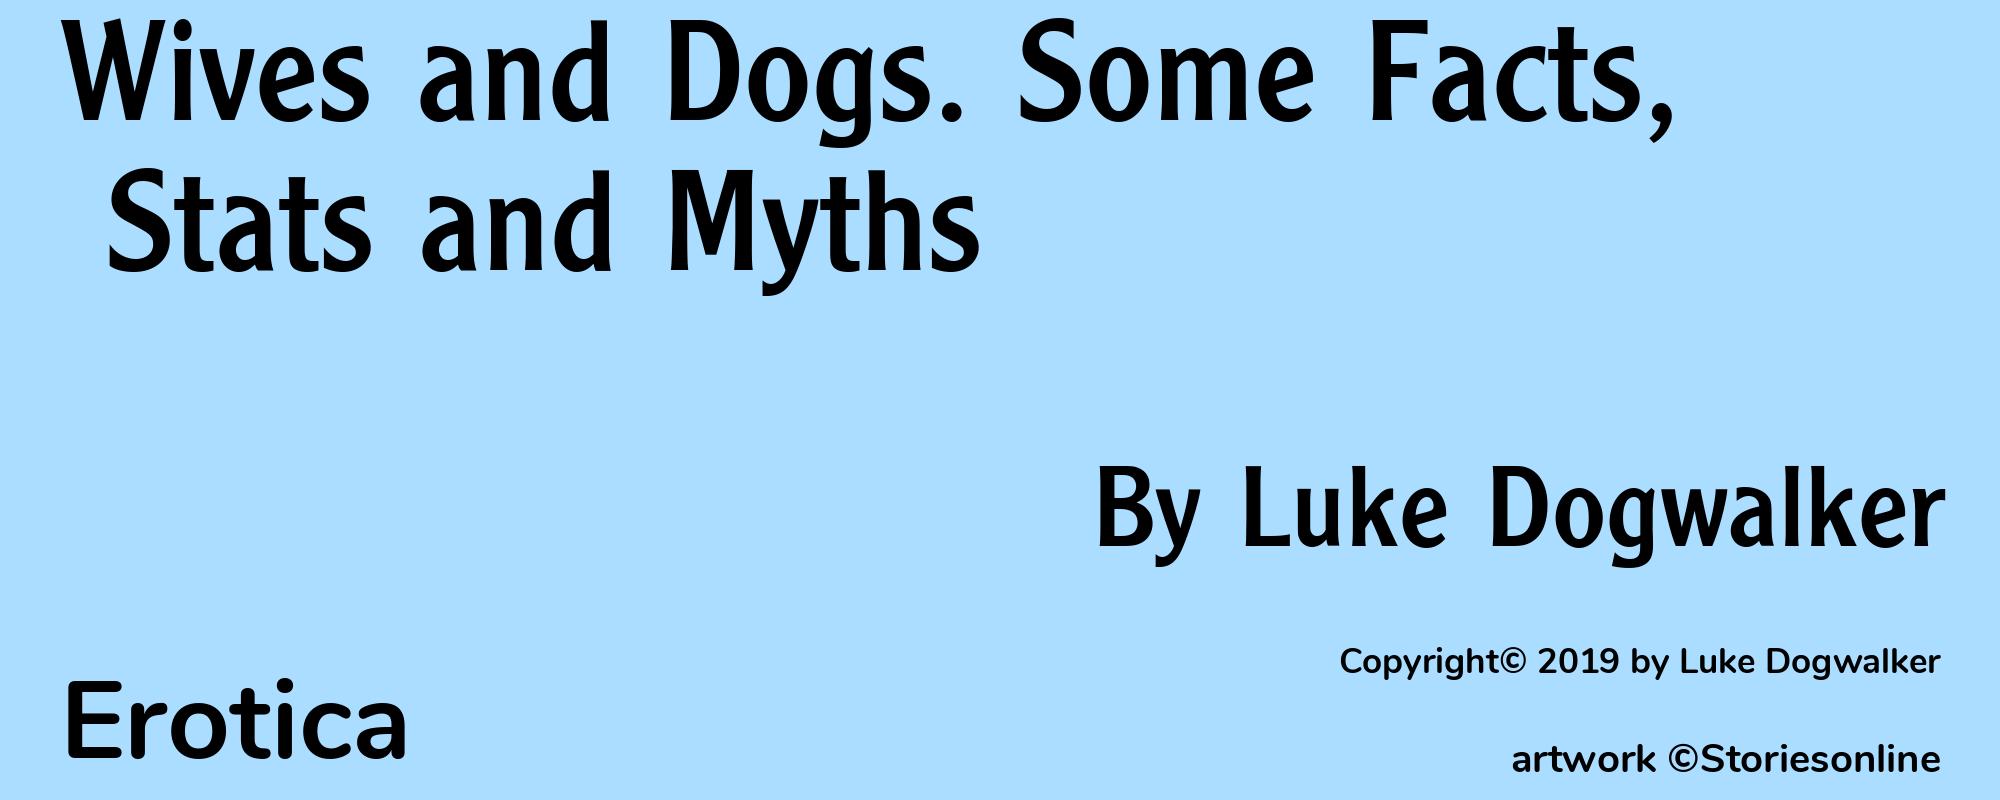 Wives and Dogs. Some Facts, Stats and Myths - Cover